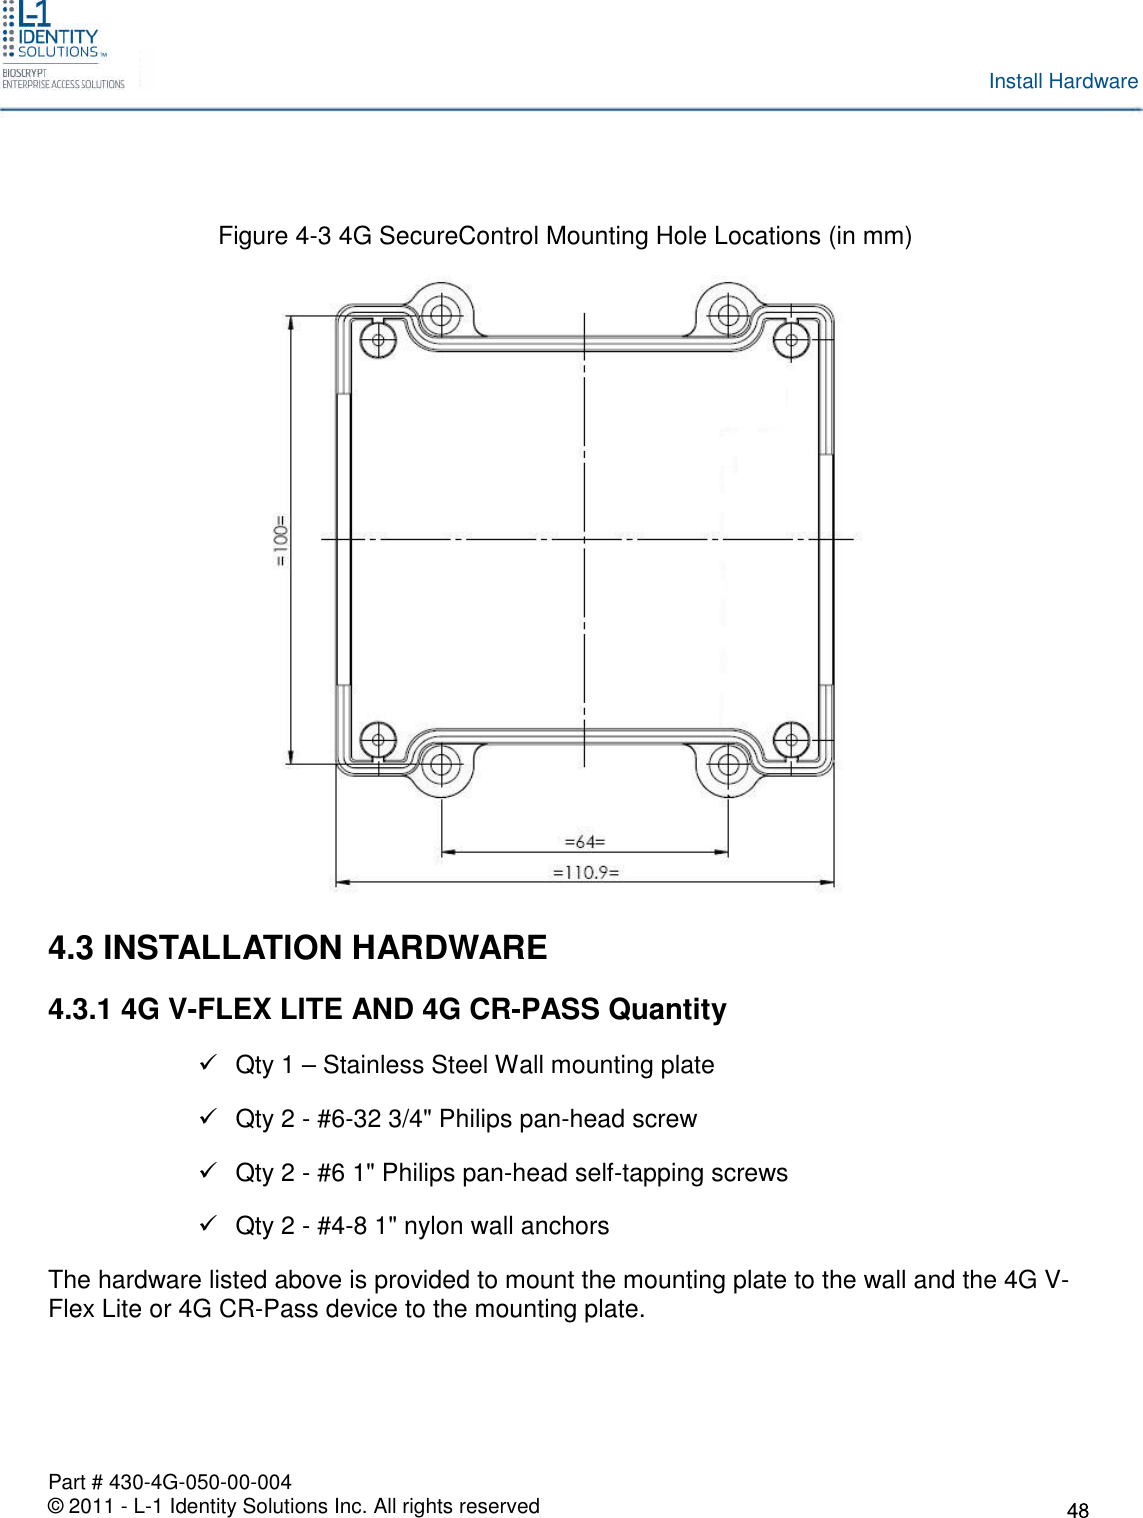 Part # 430-4G-050-00-004© 2011 - L-1 Identity Solutions Inc. All rights reservedInstall HardwareFigure 4-3 4G SecureControl Mounting Hole Locations (in mm)4.3 INSTALLATION HARDWARE4.3.1 4G V-FLEX LITE AND 4G CR-PASS QuantityQty 1 – Stainless Steel Wall mounting plateQty 2 - #6-32 3/4&quot; Philips pan-head screwQty 2 - #6 1&quot; Philips pan-head self-tapping screwsQty 2 - #4-8 1&quot; nylon wall anchorsThe hardware listed above is provided to mount the mounting plate to the wall and the 4G V-Flex Lite or 4G CR-Pass device to the mounting plate.